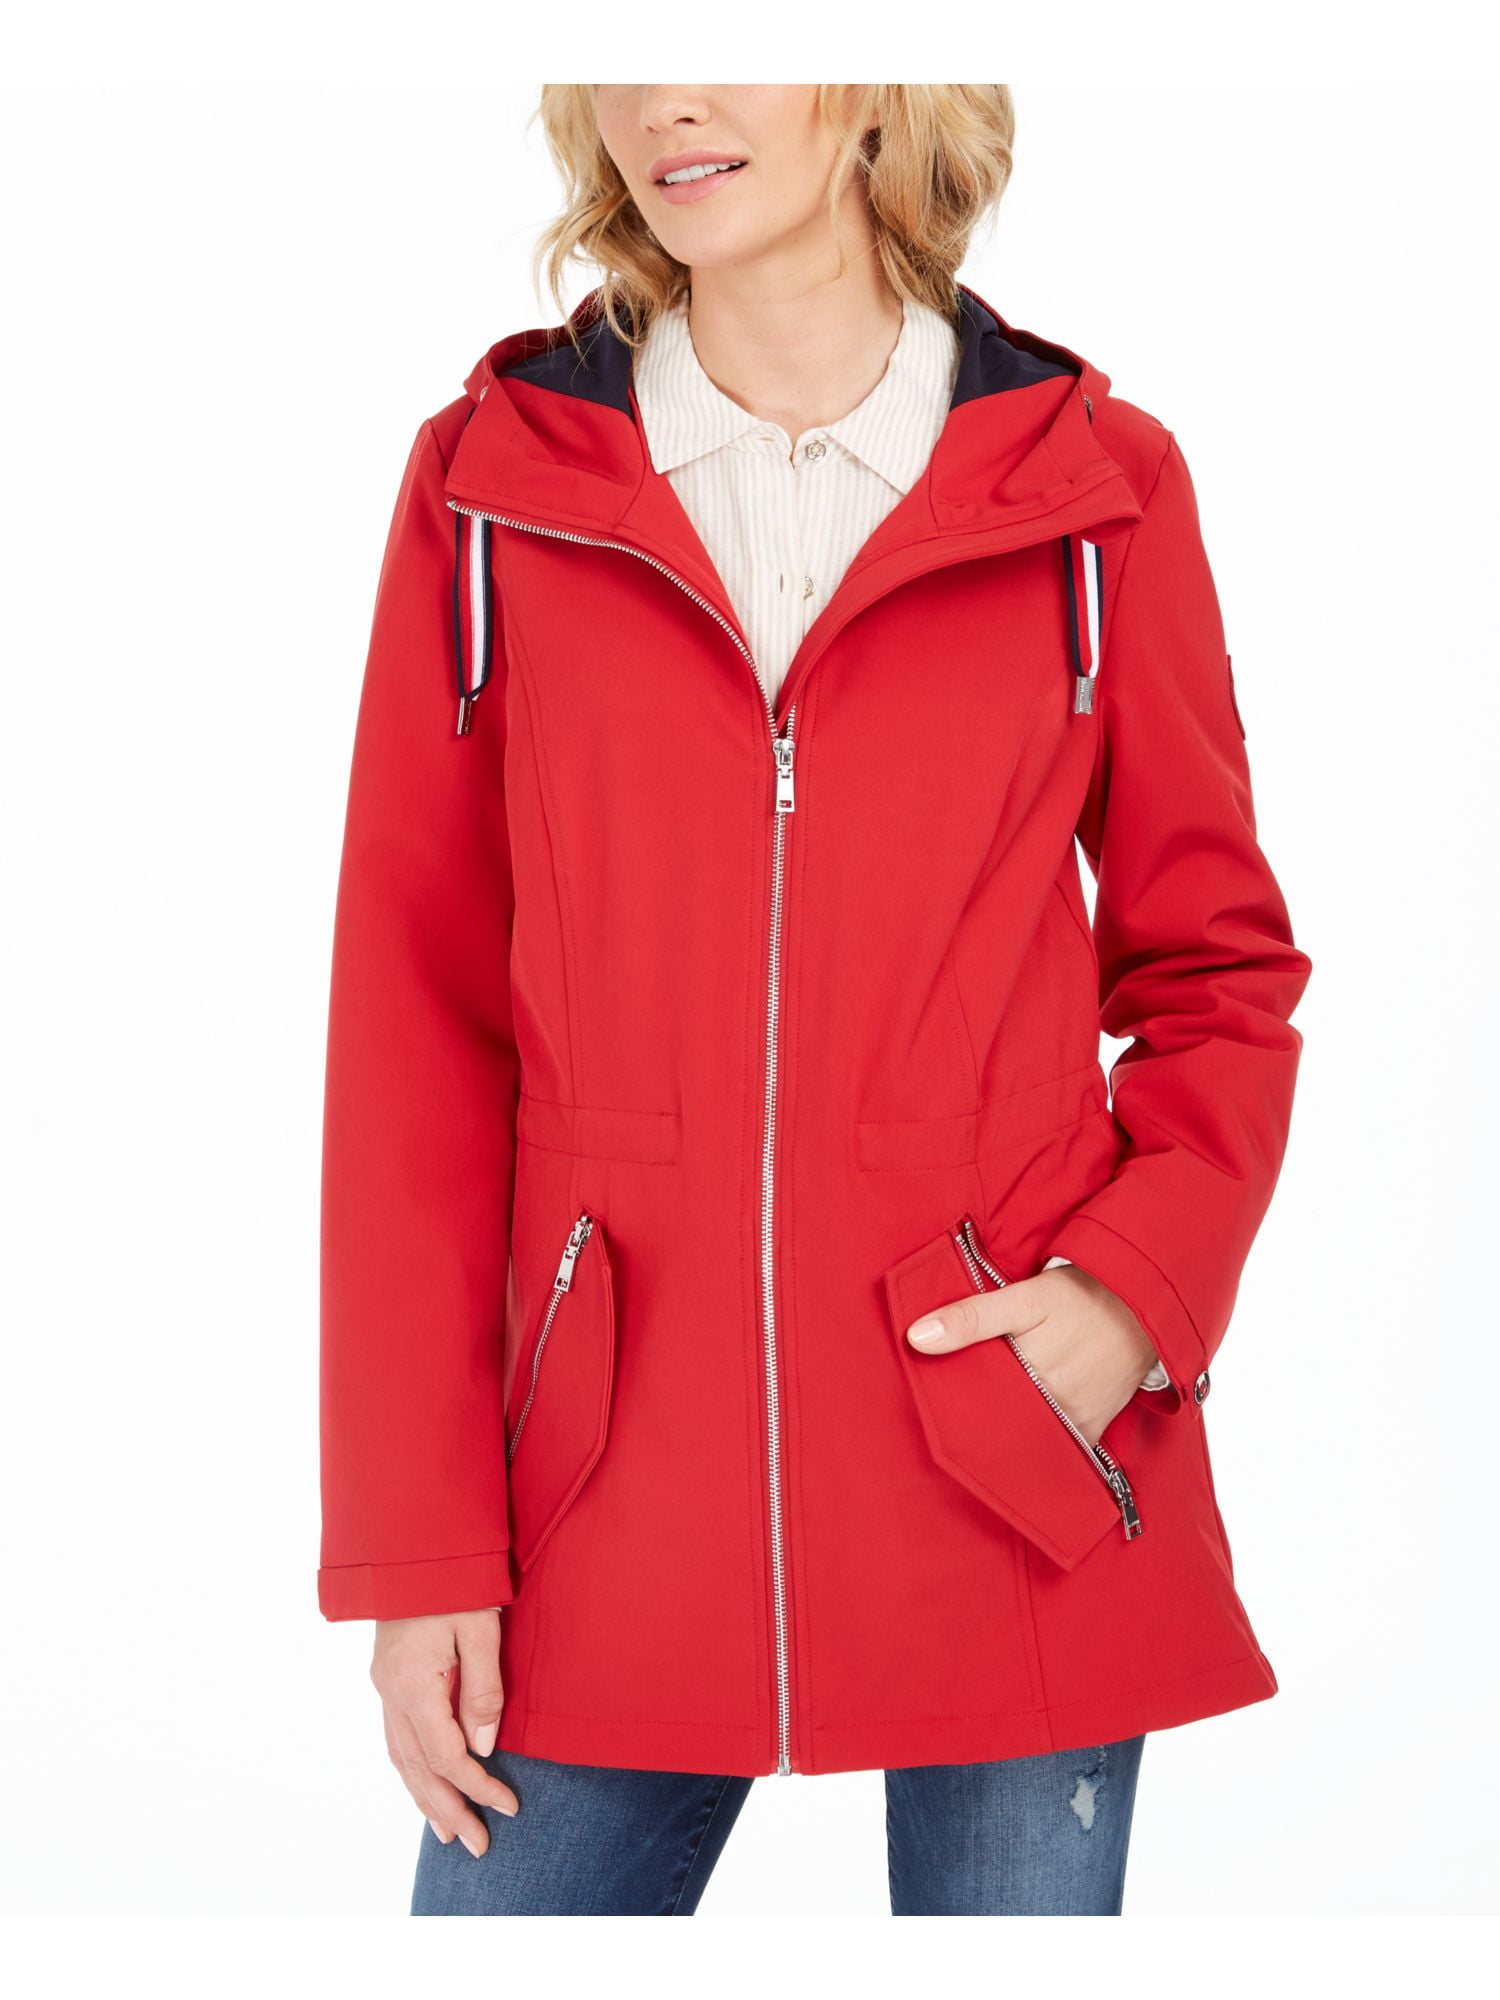 TOMMY HILFIGER Womens Red Zippered Pocketed Hooded Zip Up Winter Jacket M - Walmart.com